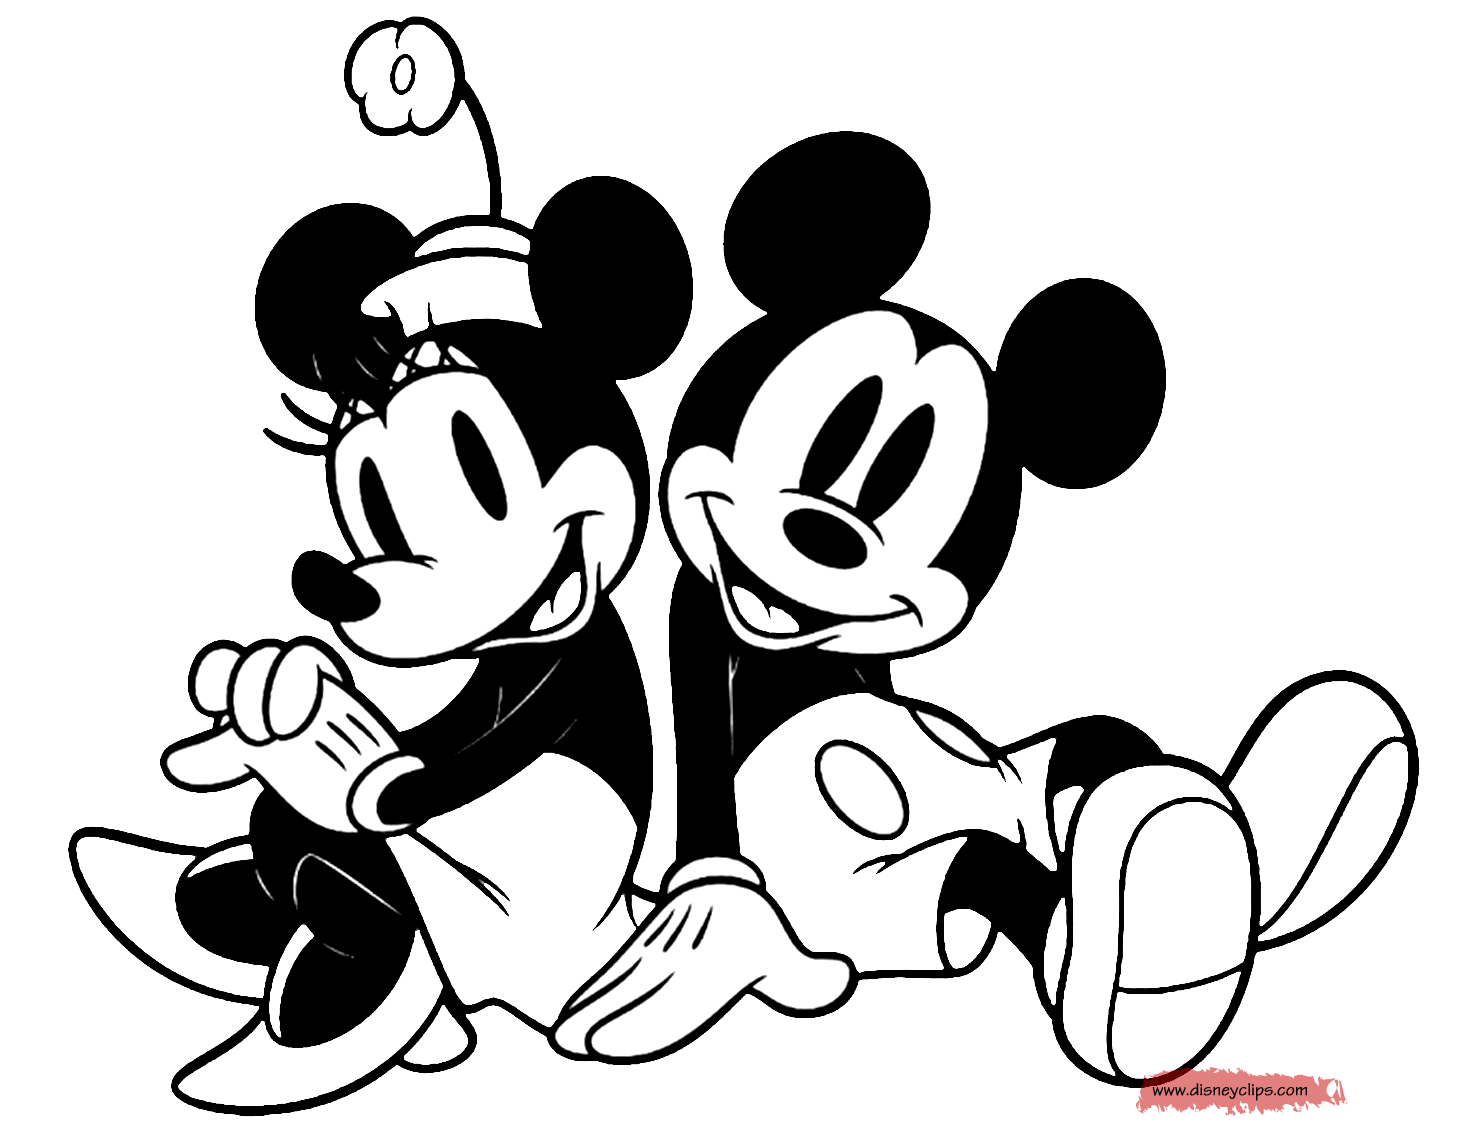 Classic Mickey and Friends Coloring Pages | Disney's World ...